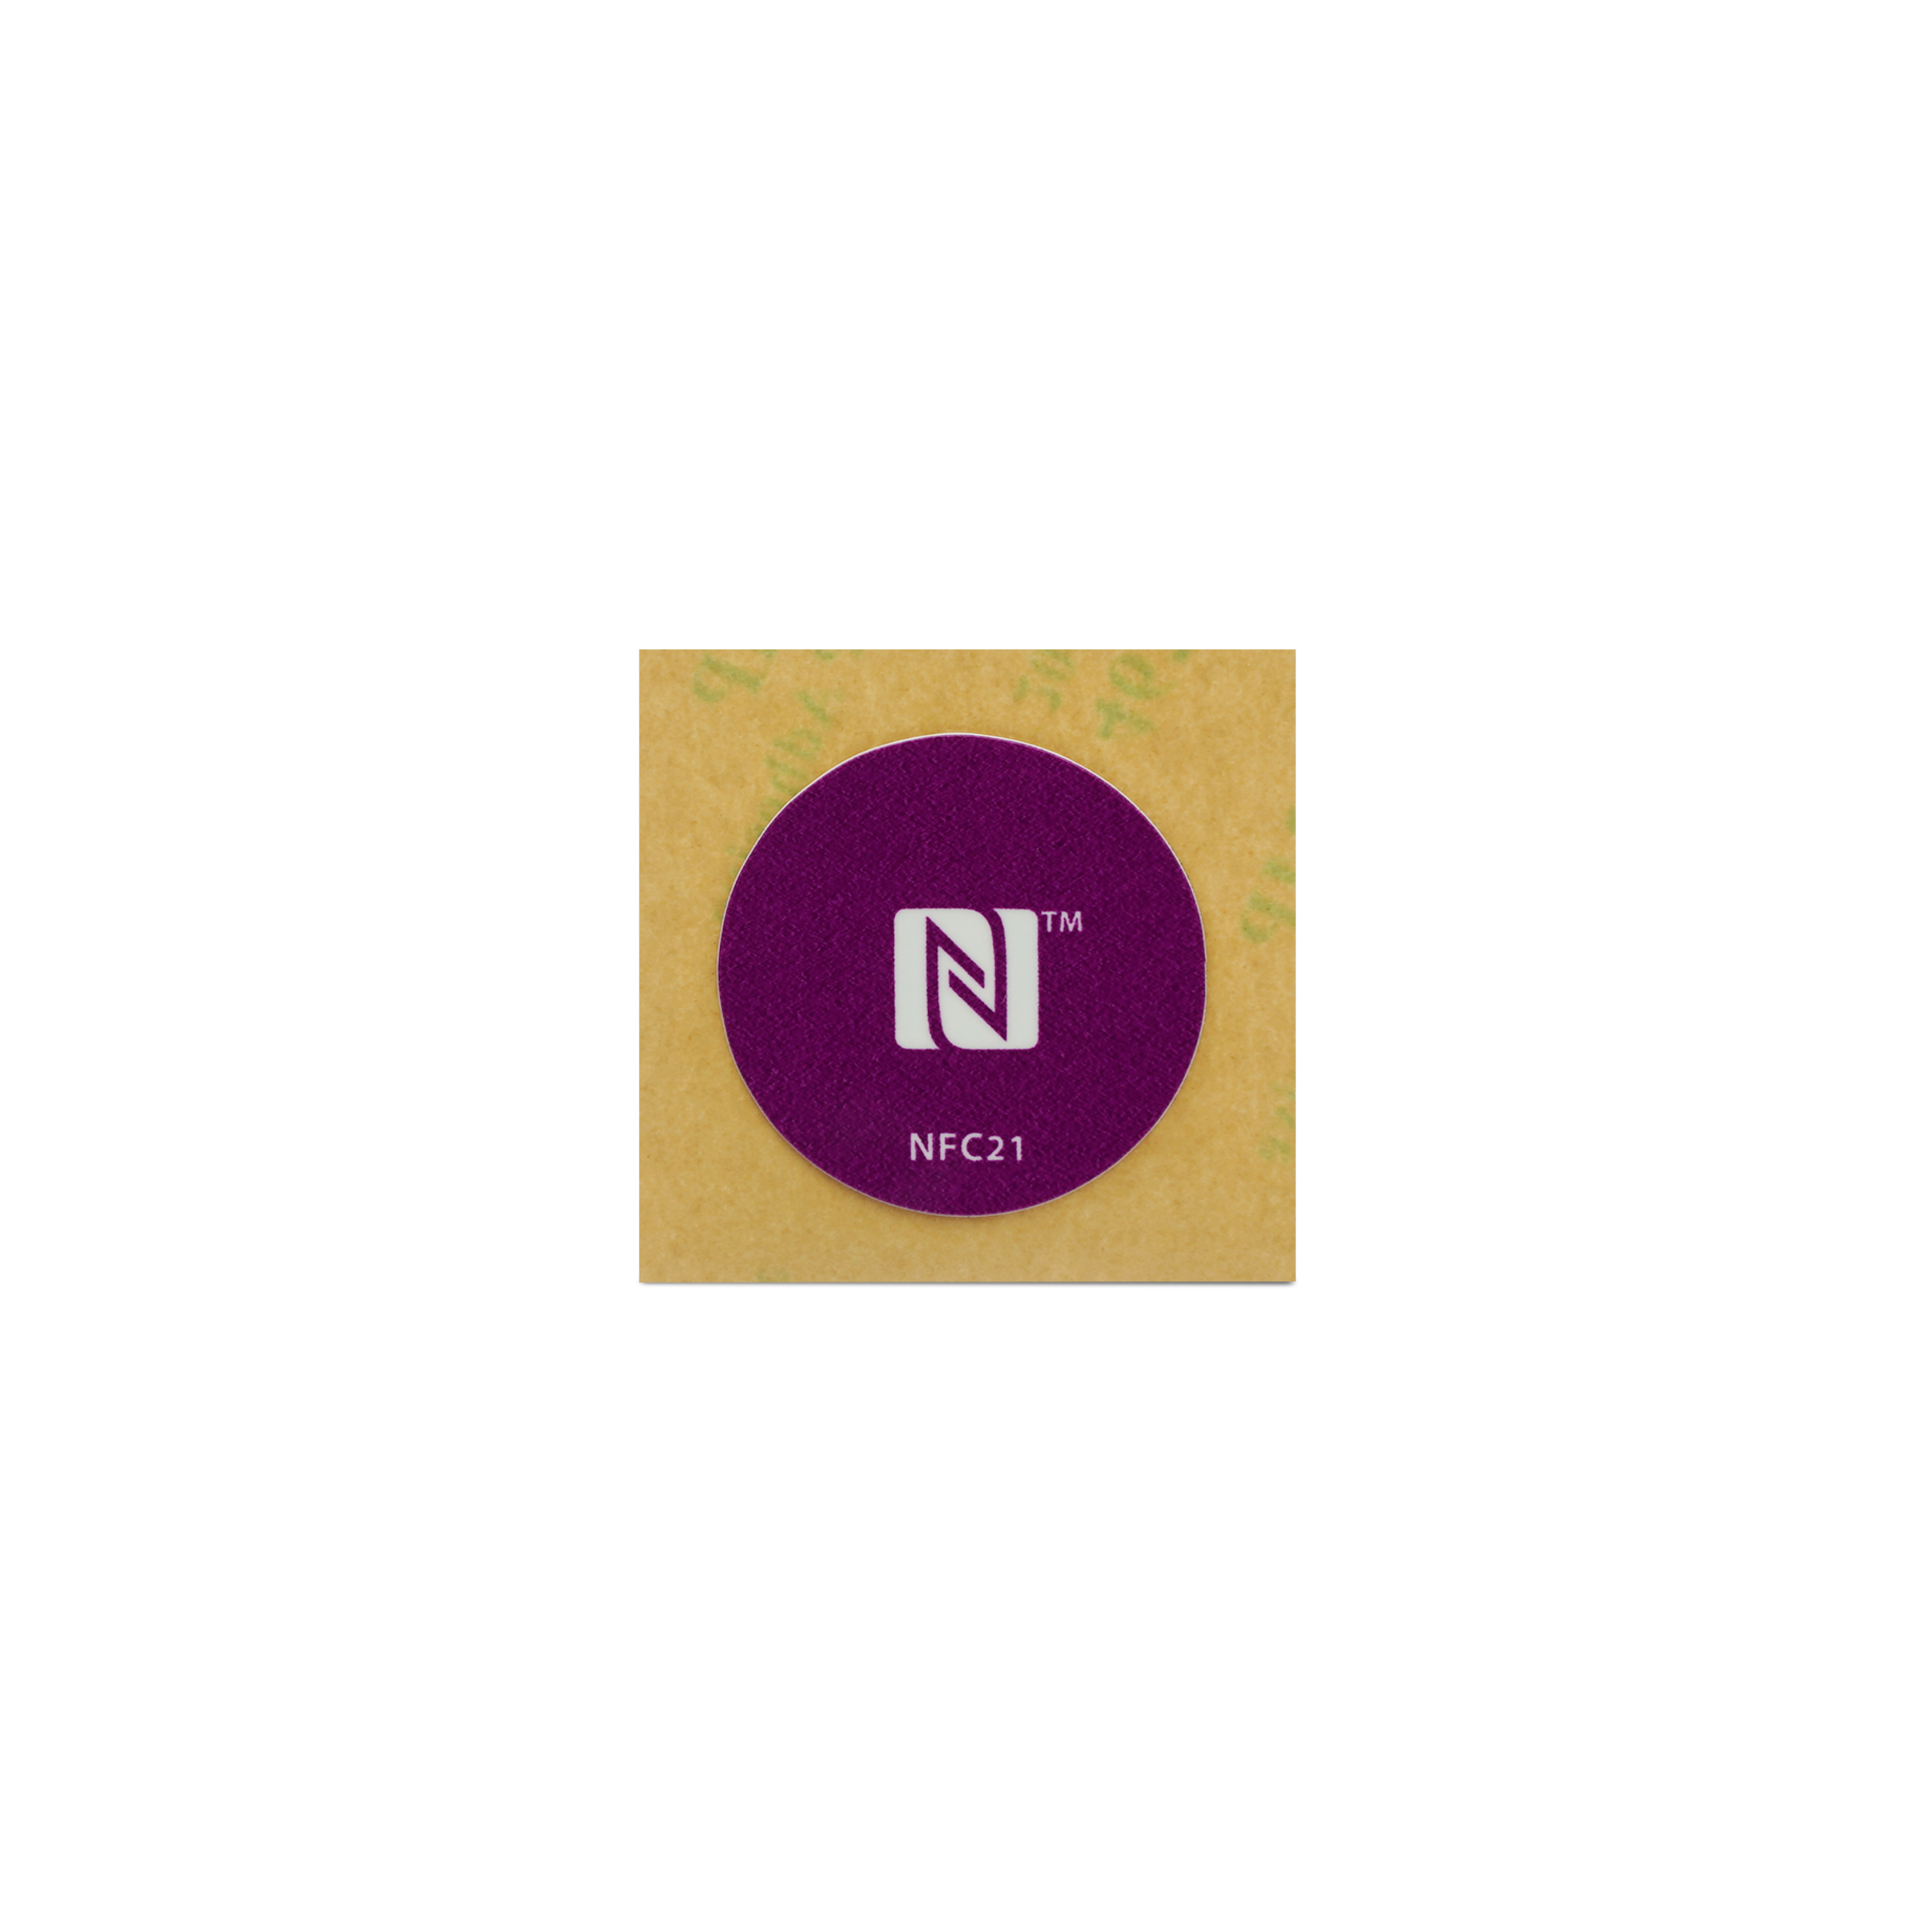 NFC Sticker On-Metal - 22 mm - NTAG213 - 180 Byte - purple with logo